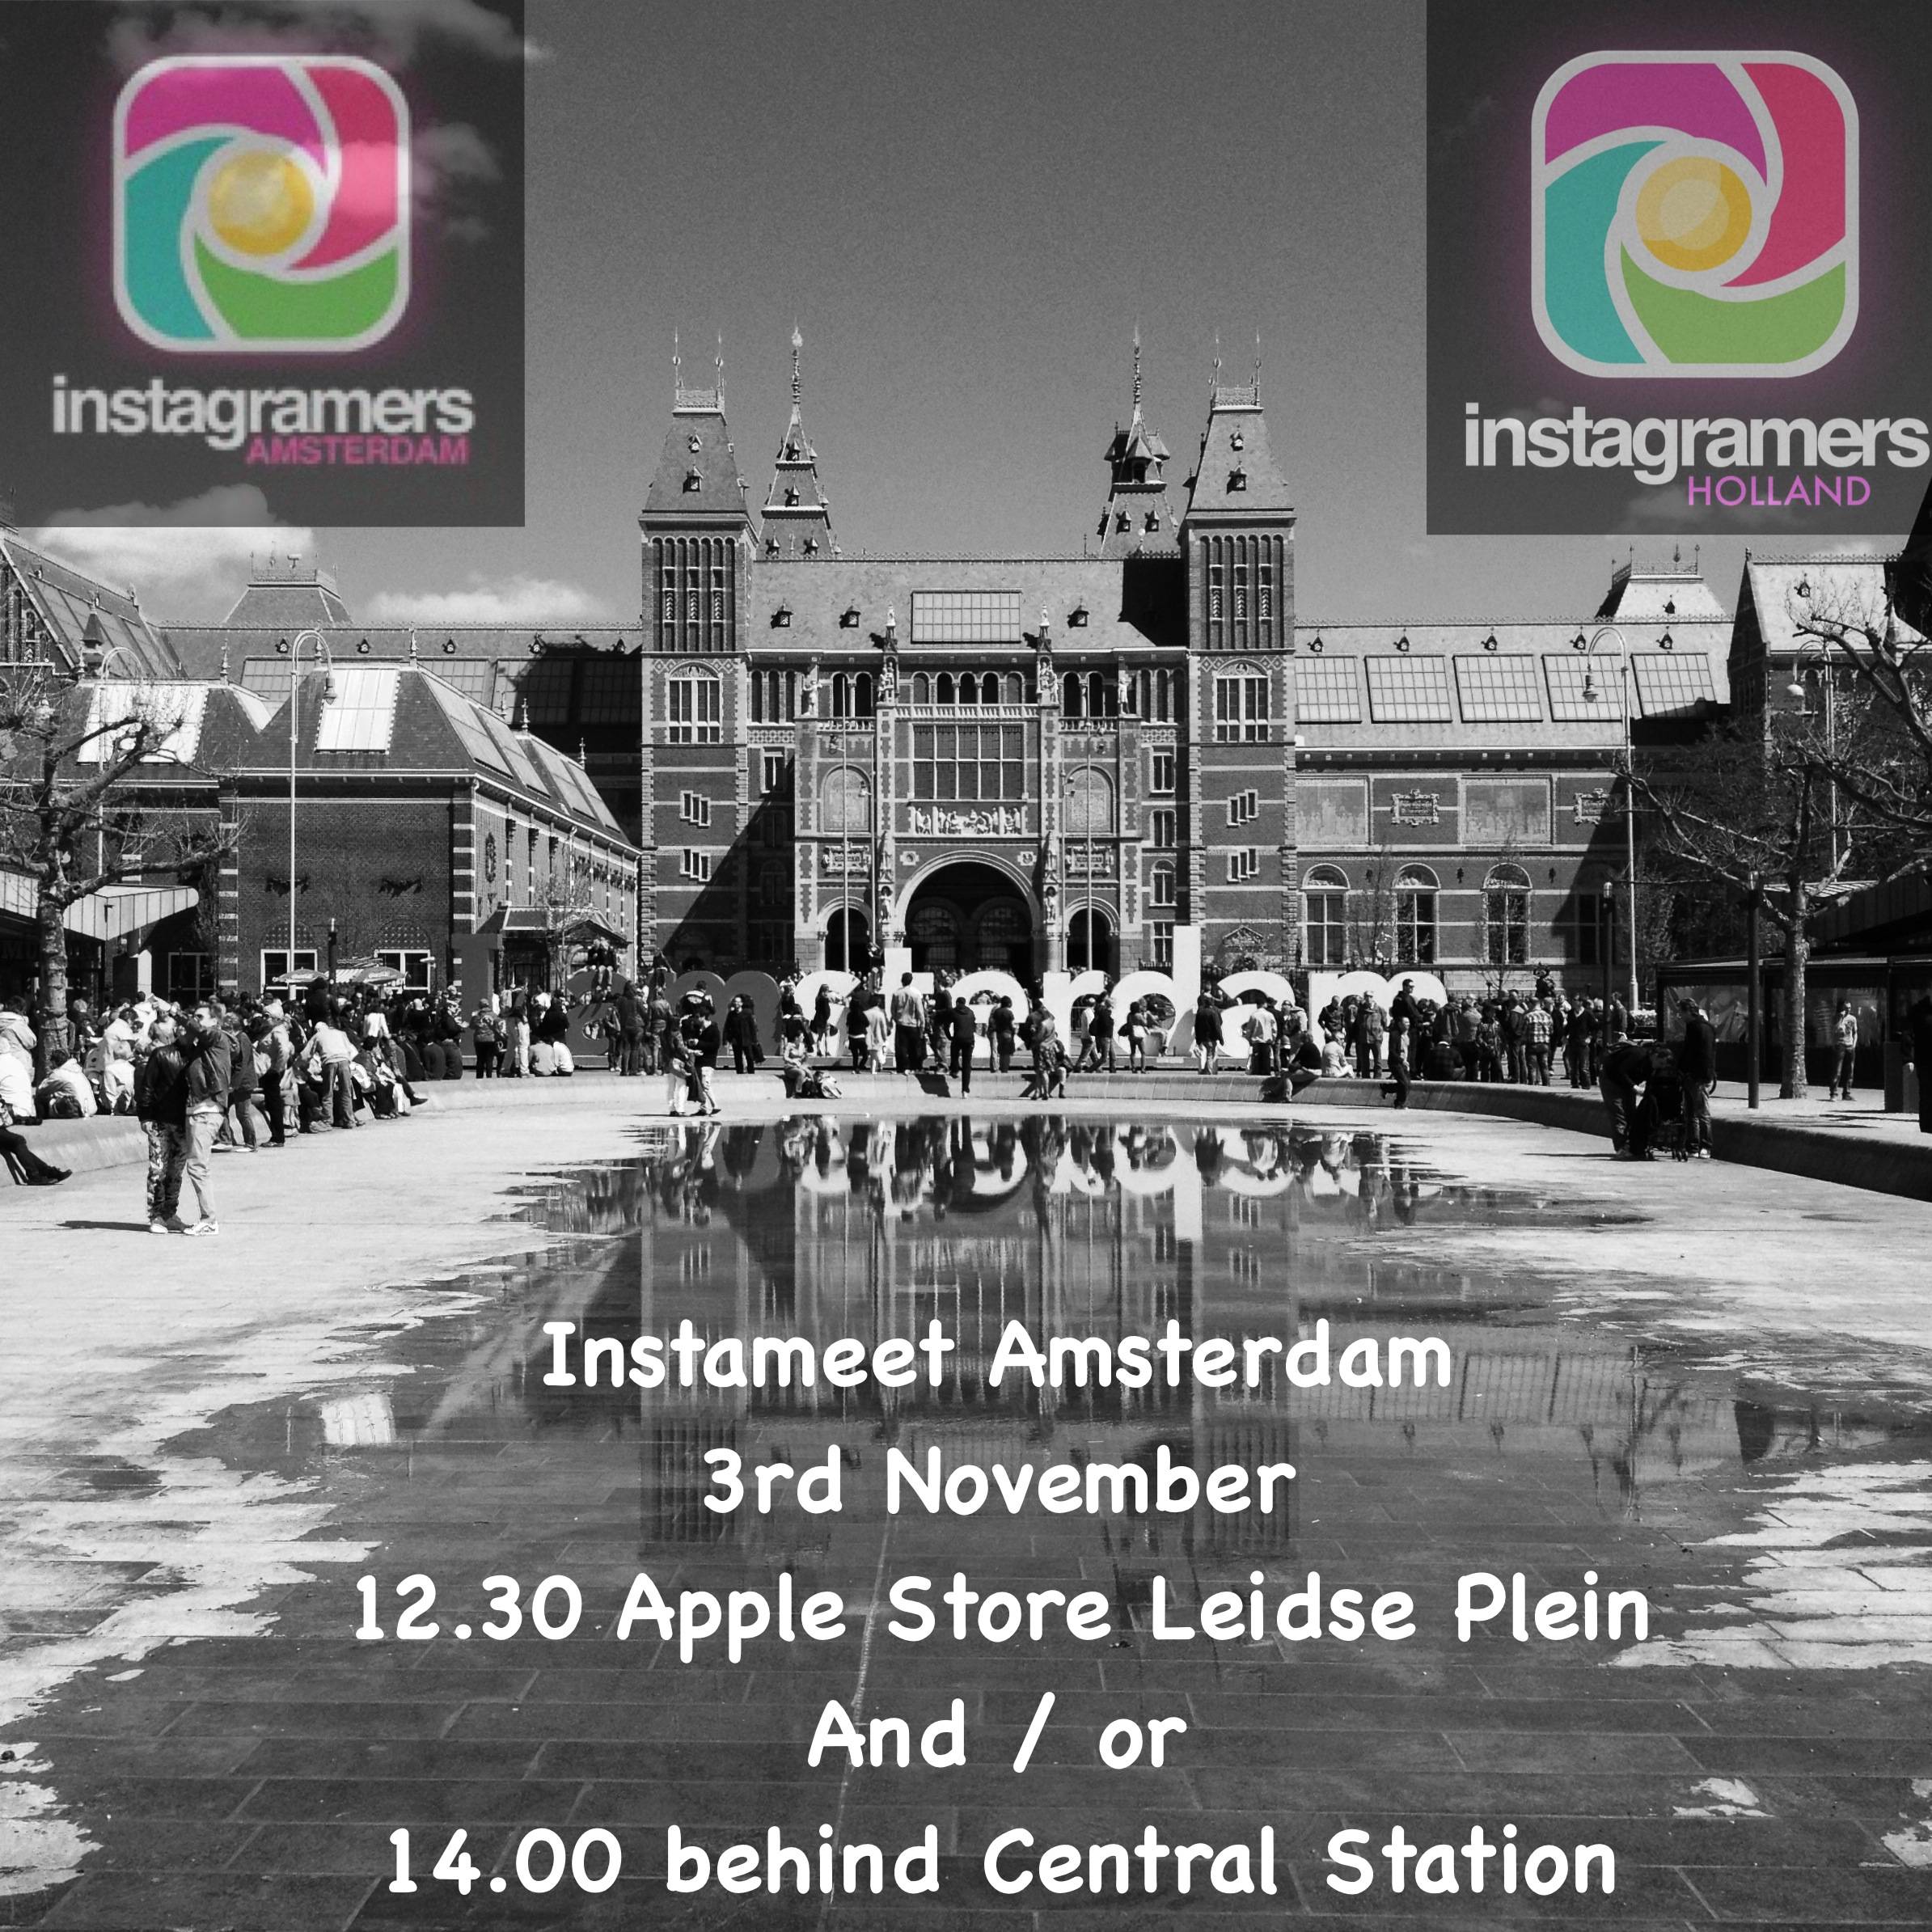 Enjoy a day out with @igersholland and @igersamsterdam!